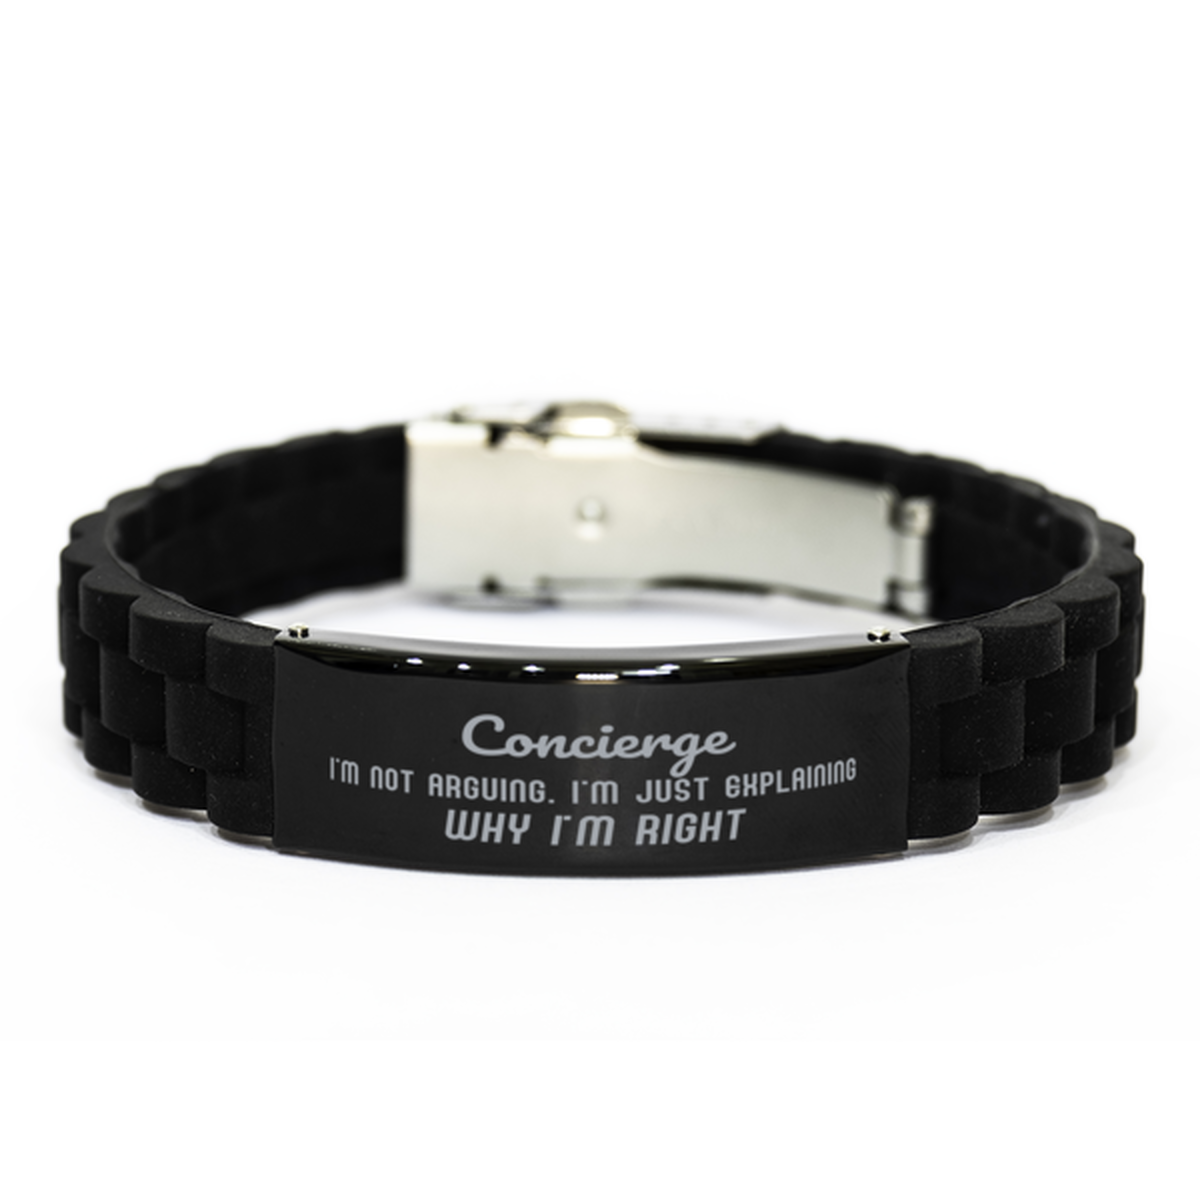 Concierge I'm not Arguing. I'm Just Explaining Why I'm RIGHT Black Glidelock Clasp Bracelet, Funny Saying Quote Concierge Gifts For Concierge Graduation Birthday Christmas Gifts for Men Women Coworker